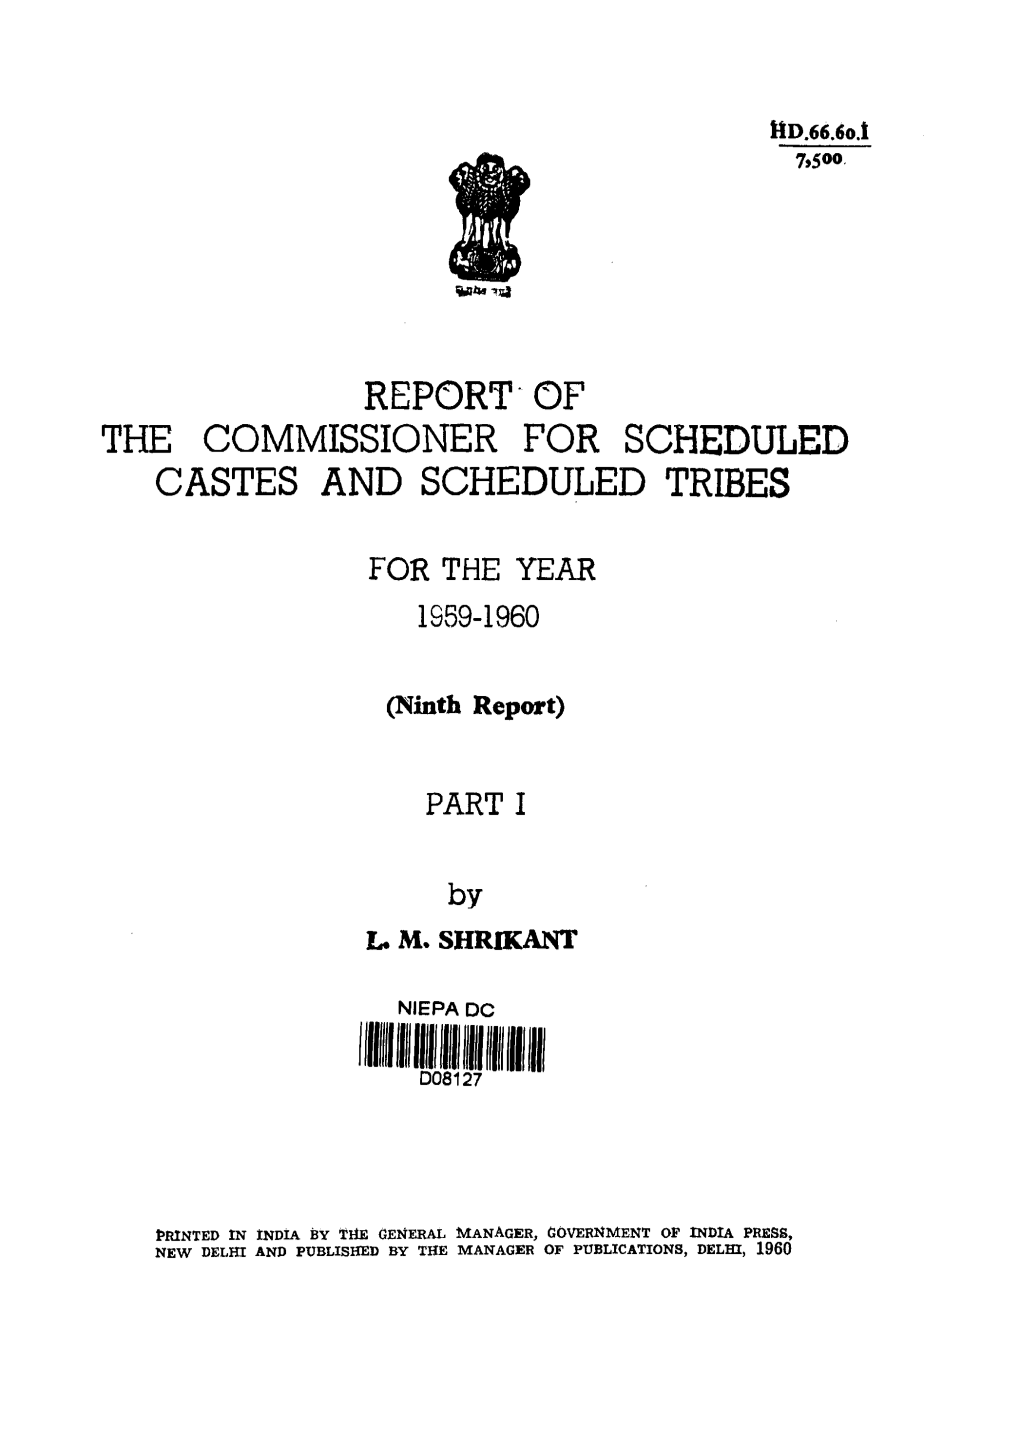 Report of the Commissioner for Scheduled Castes and Scheduled Tribes